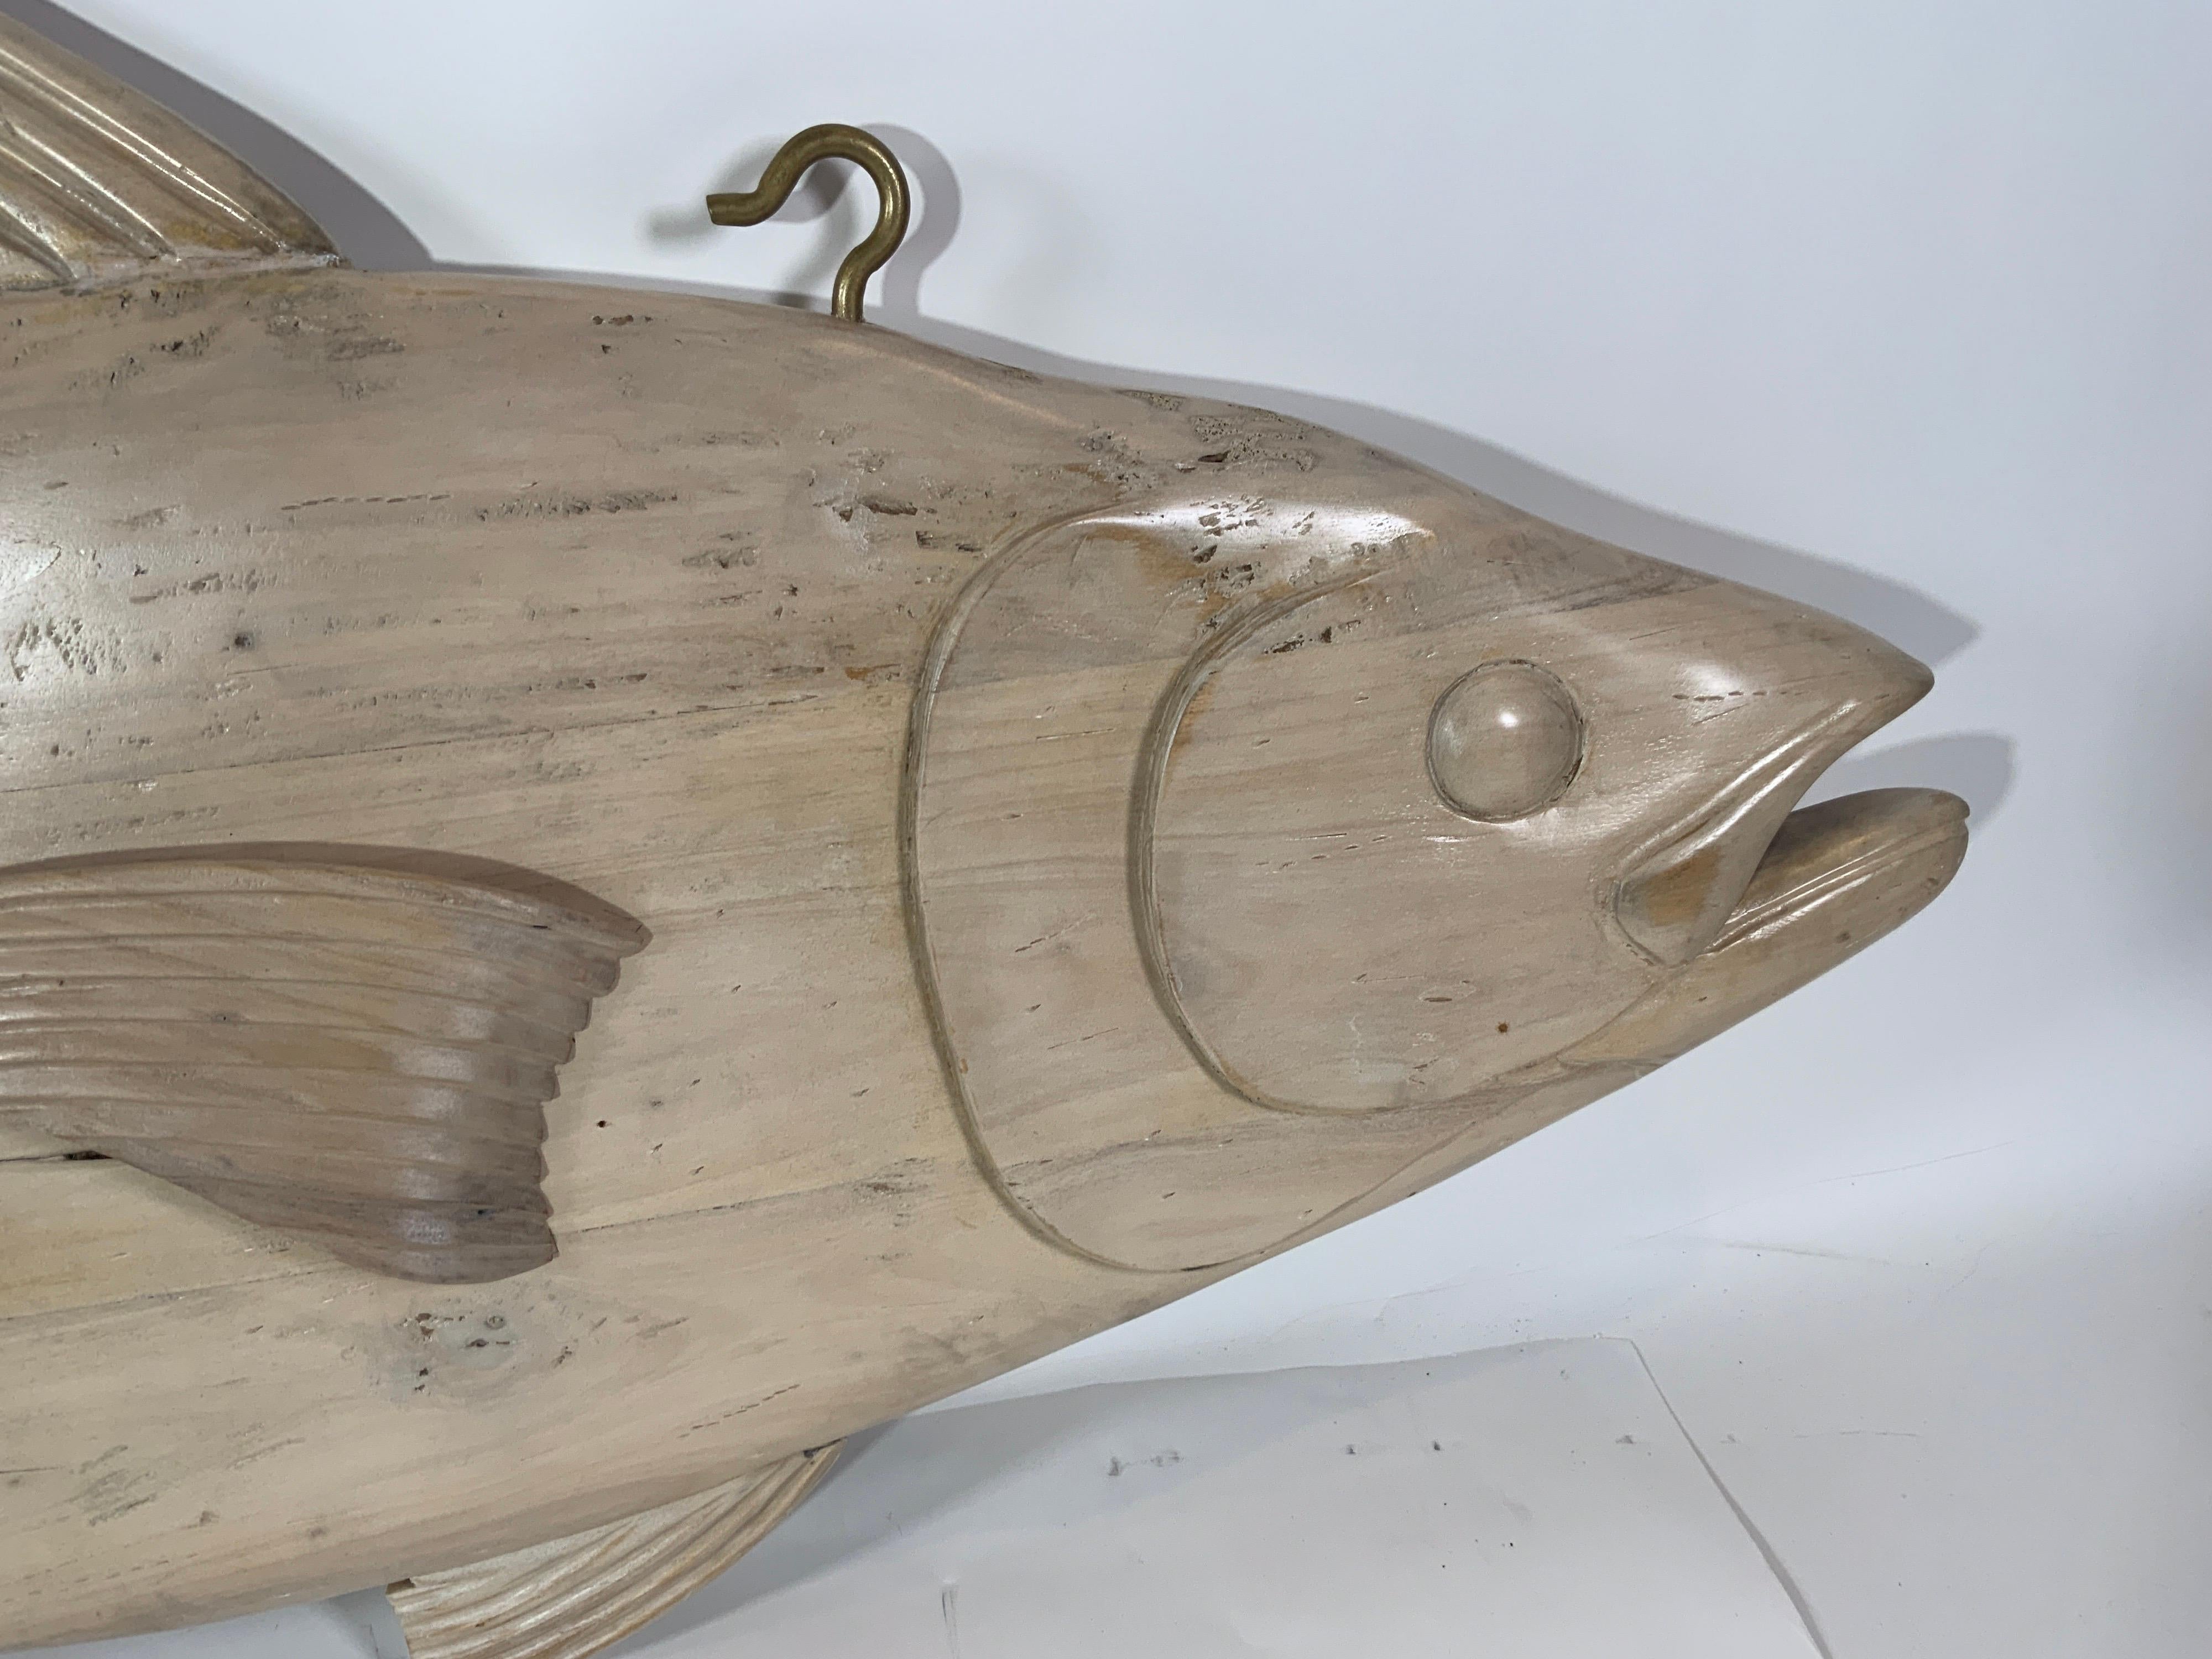 Woodwork Six Foot Carved Wood Tuna Fish For Sale